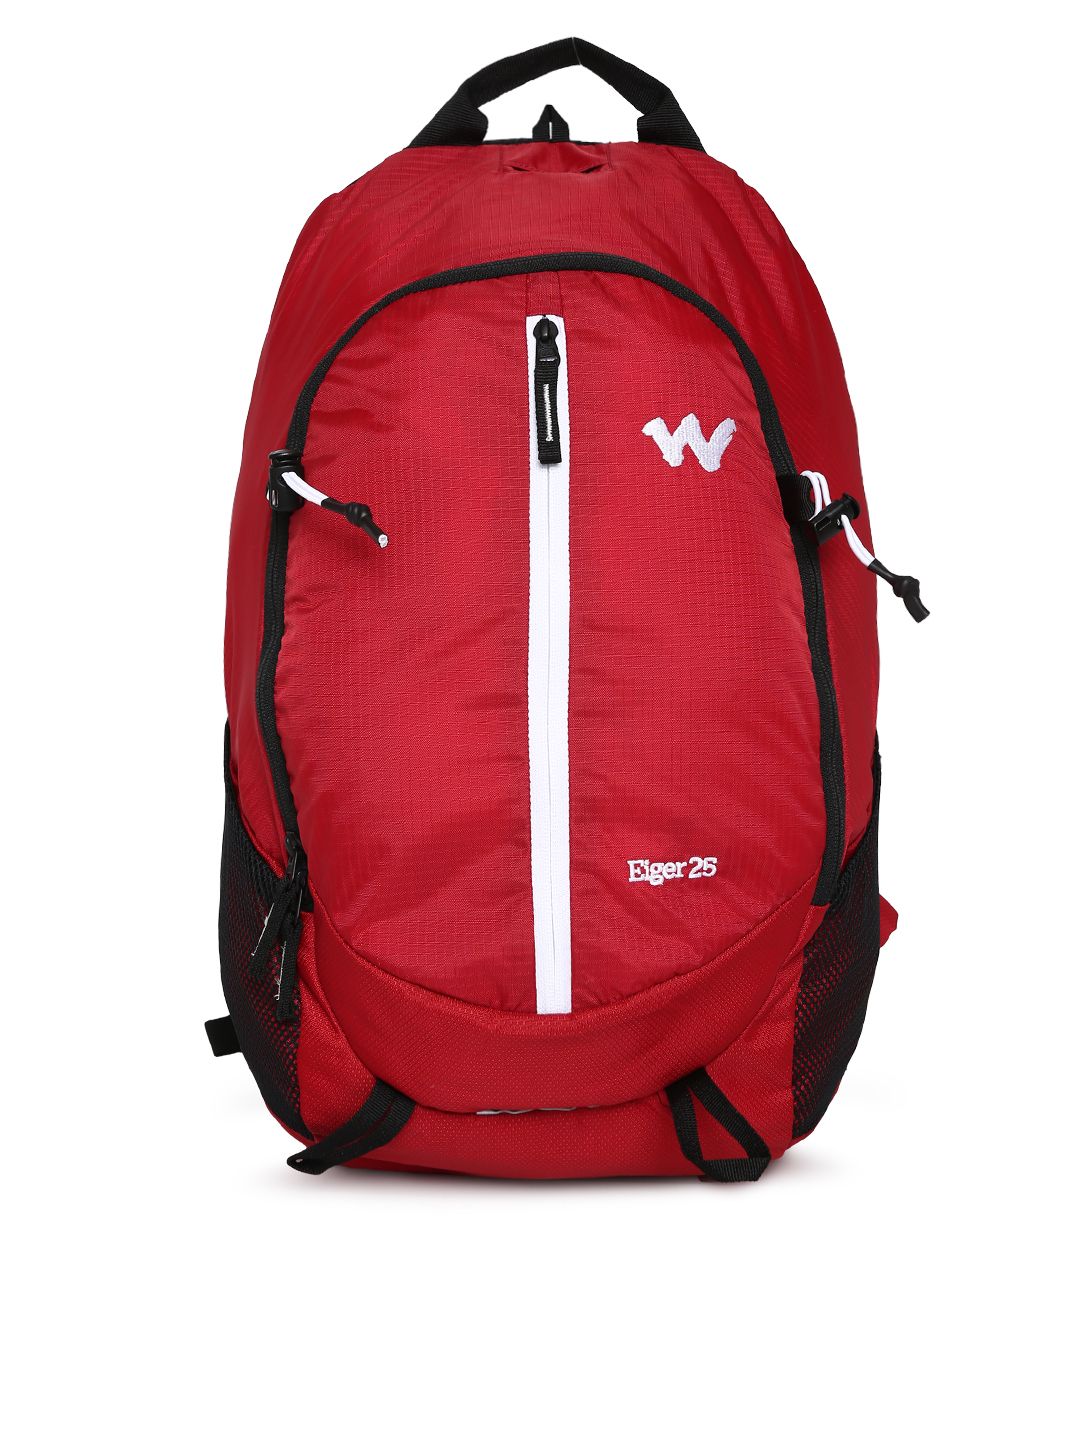 Wildcraft Unisex Red Solid Eiger 25 Backpack Price in India